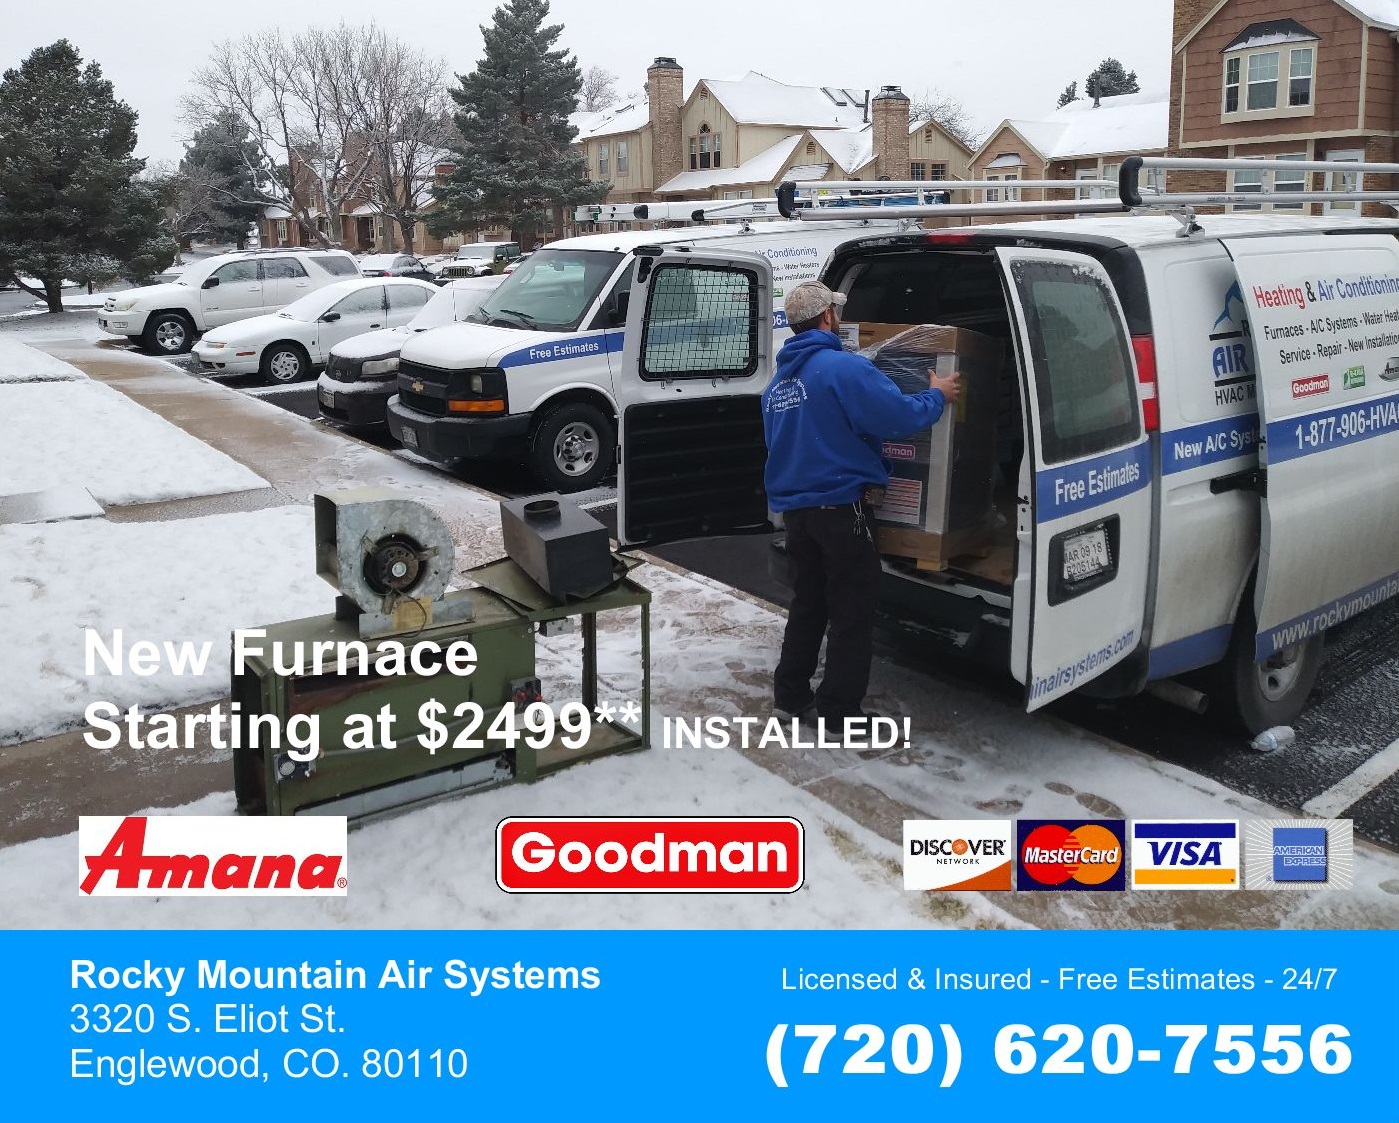 Heating and Air Conditioning - Rocky Mountain Air Systems - 24/7 - Free Estimates